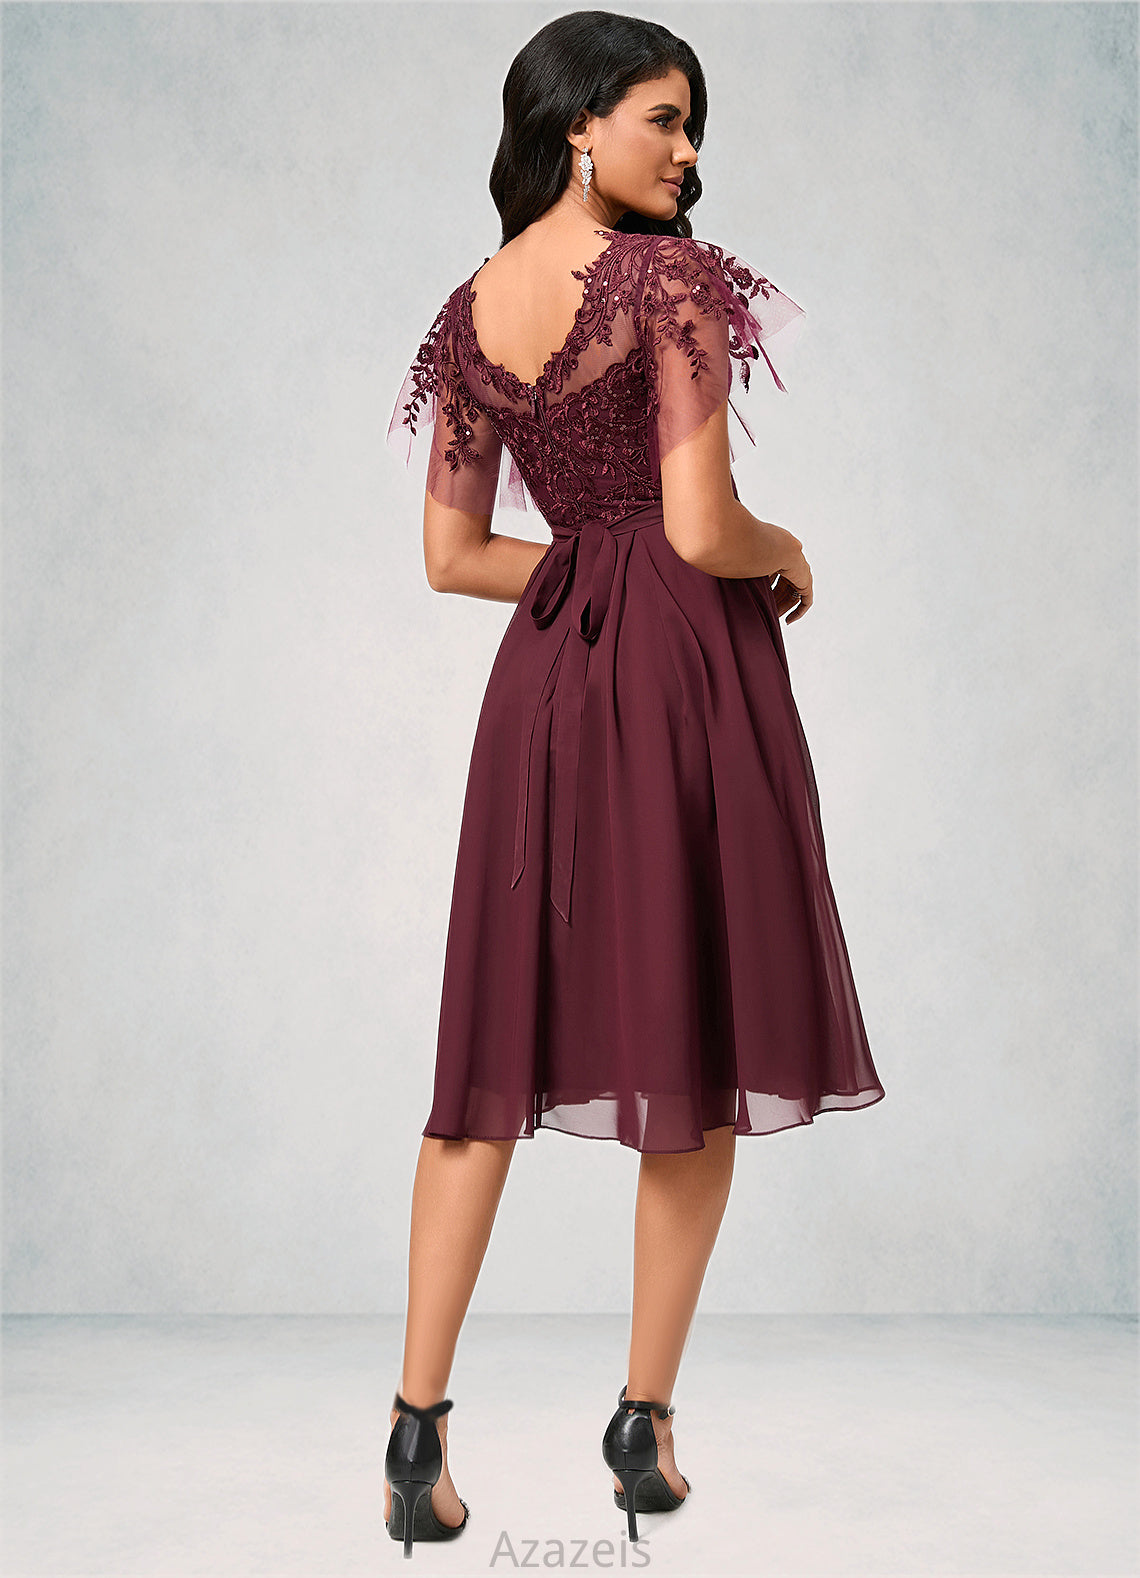 Neveah A-line Illusion Knee-Length Chiffon Cocktail Dress With Sequins DFP0022512